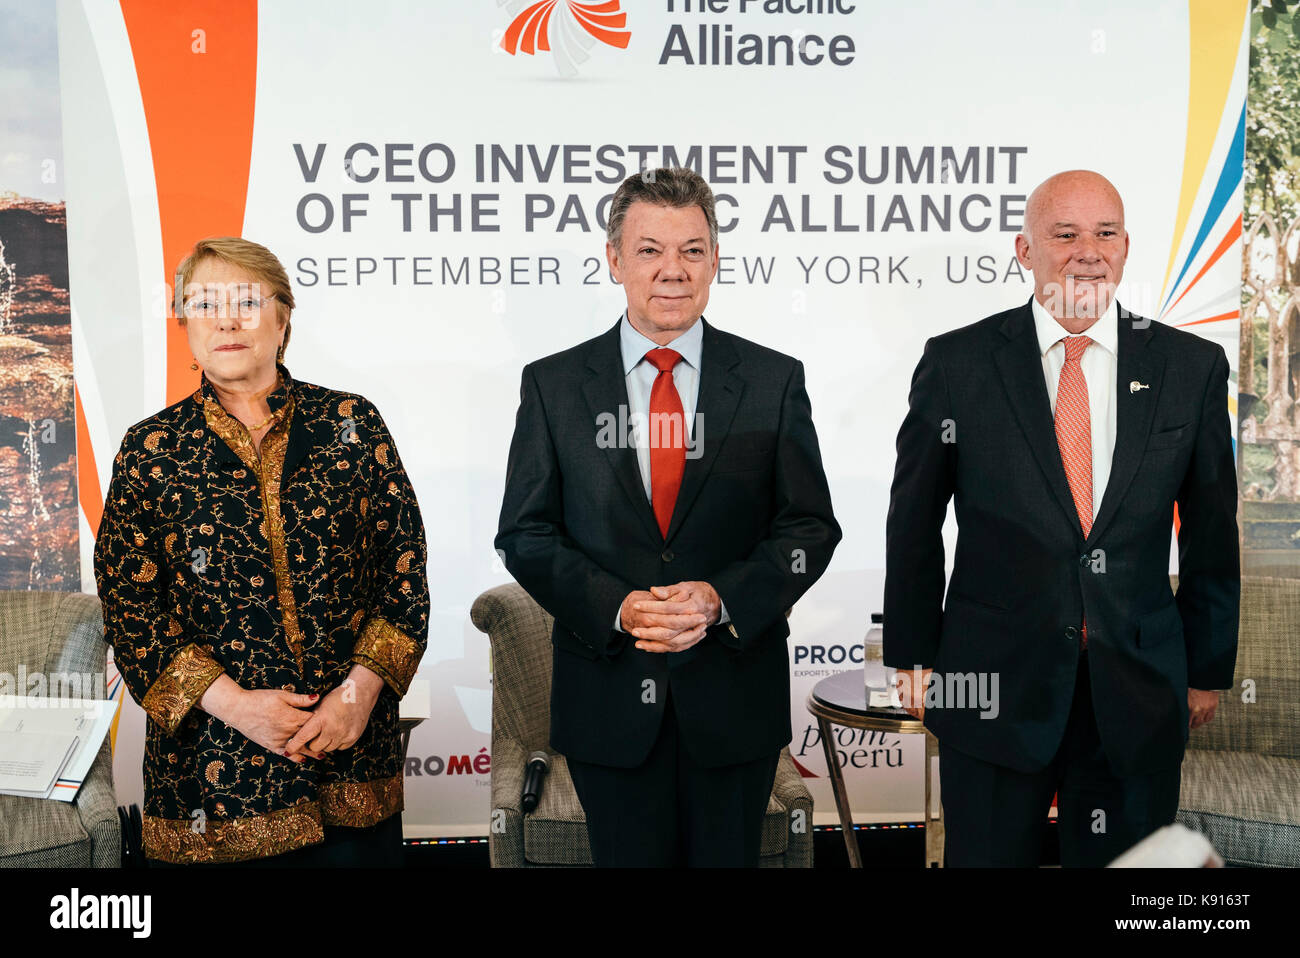 Chilean President Michelle Bachelet, Colombia President Juan Manuel Santos  and Trade Minister of Peru Eduardo Ferreyros  speakers at the CEO Investment Summit of The Pacific Alliance during UNGA Stock Photo